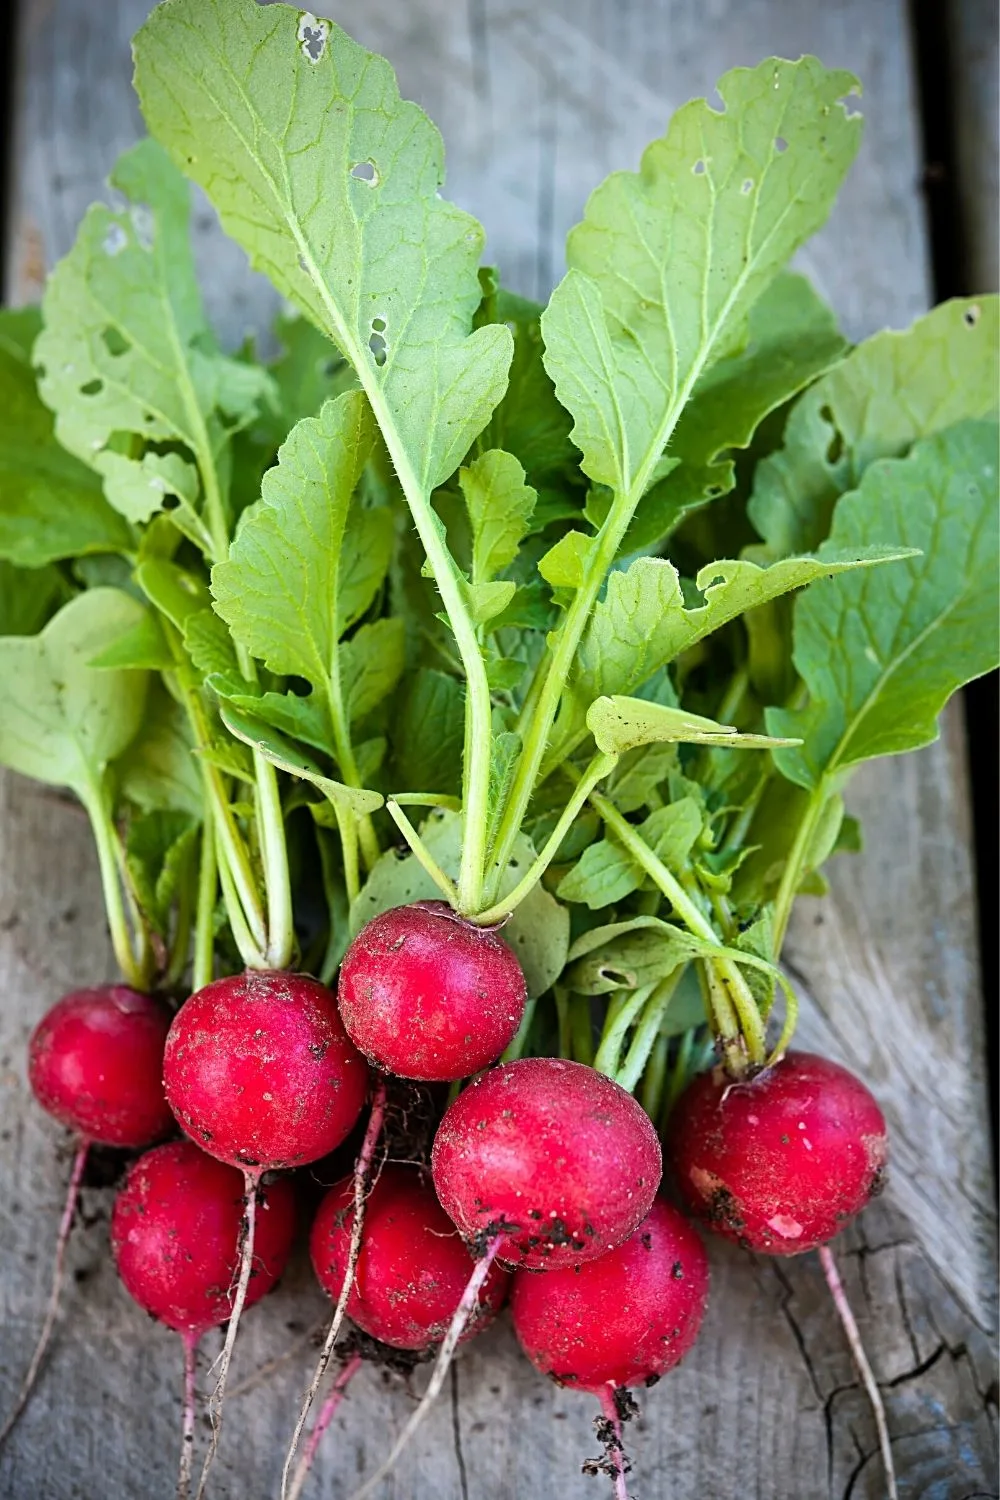 Radish is another edible plant that you can grow on your south-facing balcony if you prefer lighter meals